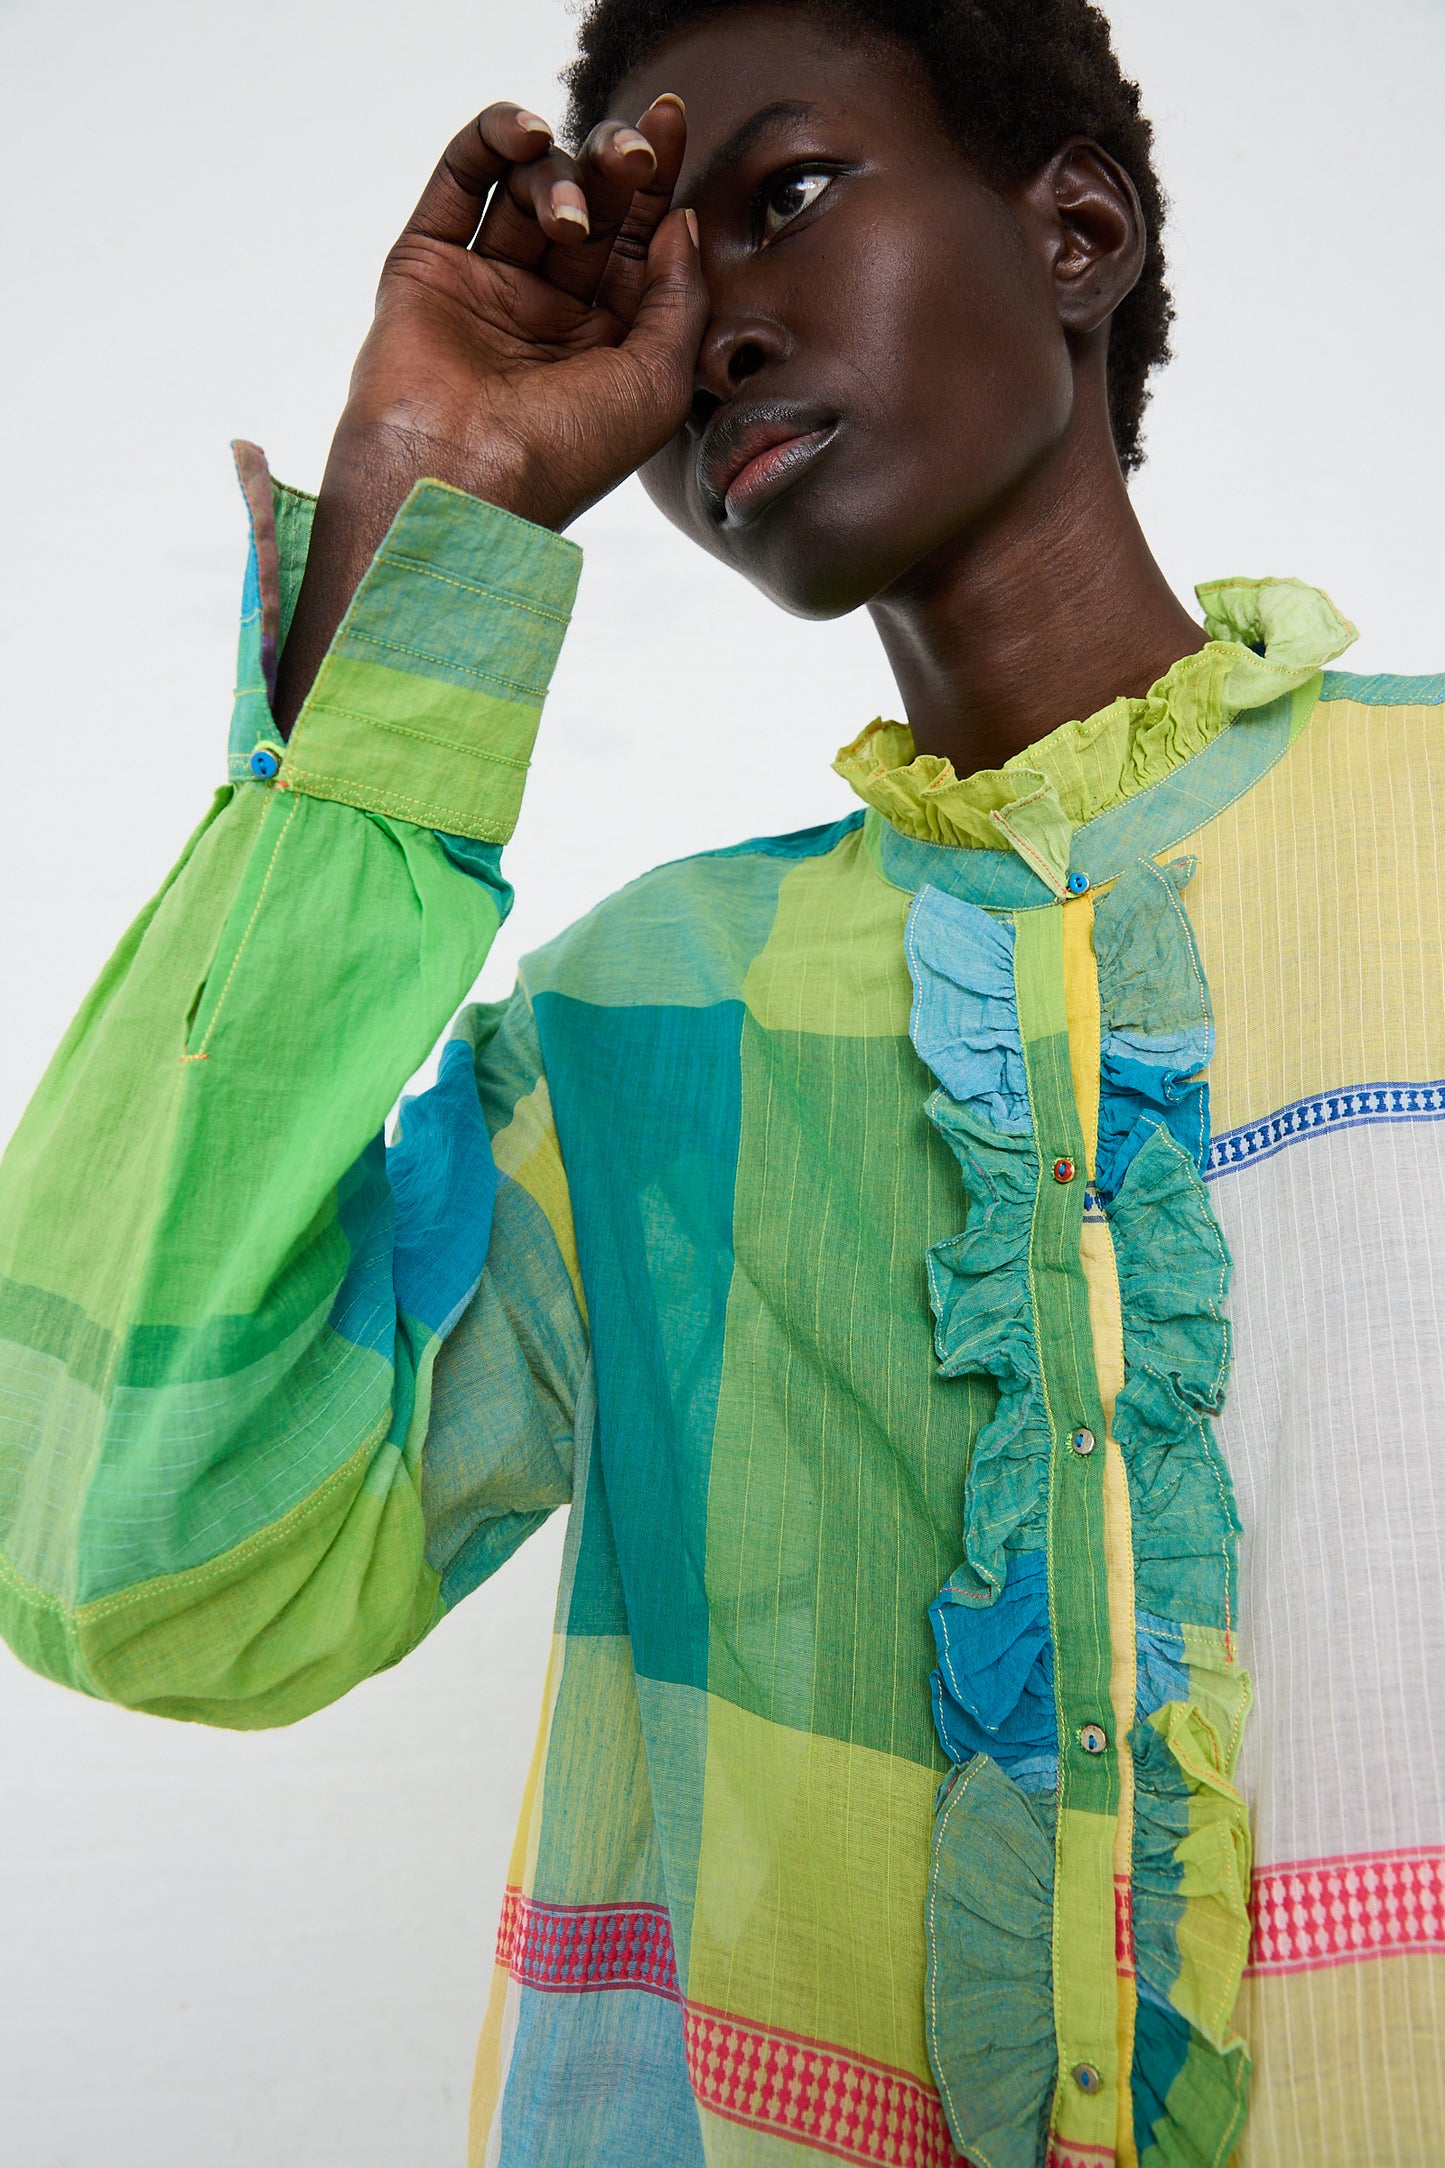 A woman in an Injiri cotton shirt in green, yellow and pink check ponderingly touches front of her head, against a white background.